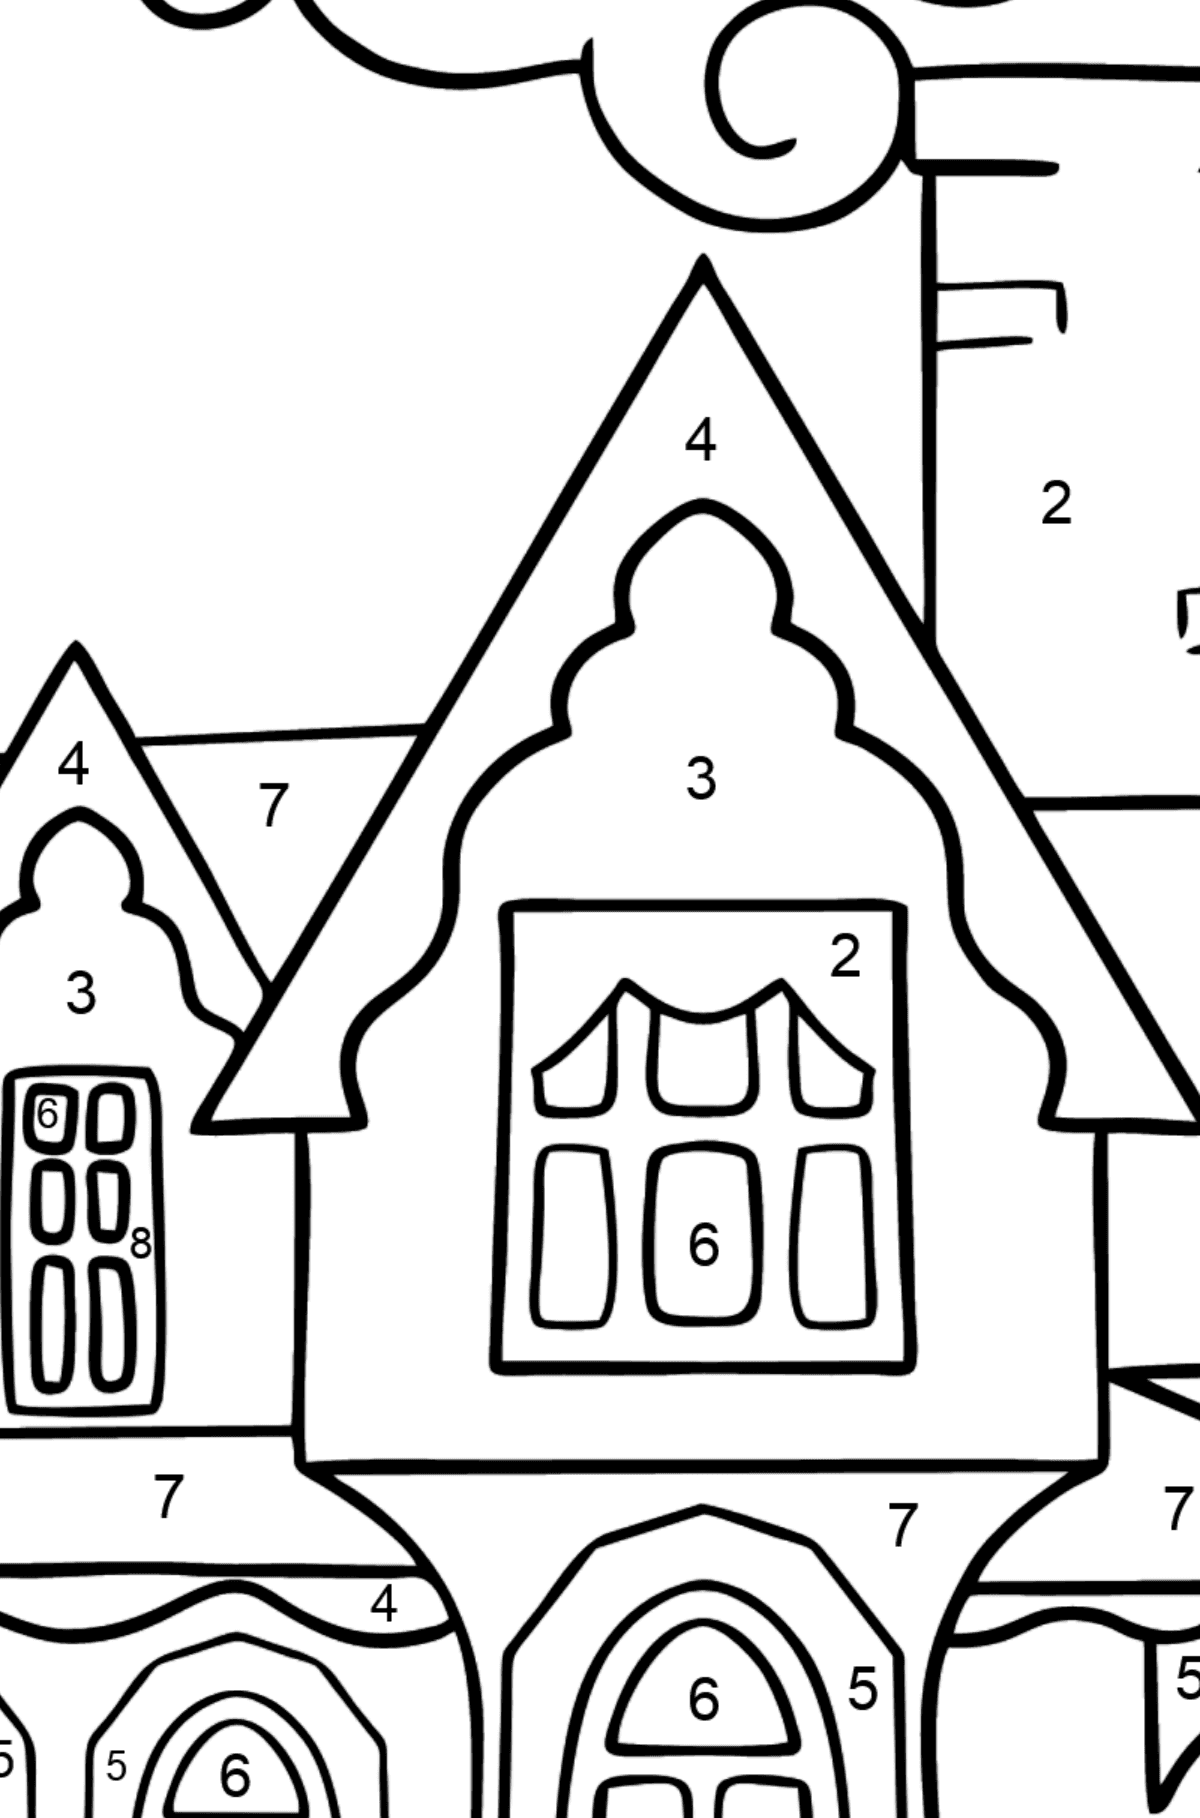 Coloring Page - A Miraculous House - Coloring by Numbers for Kids